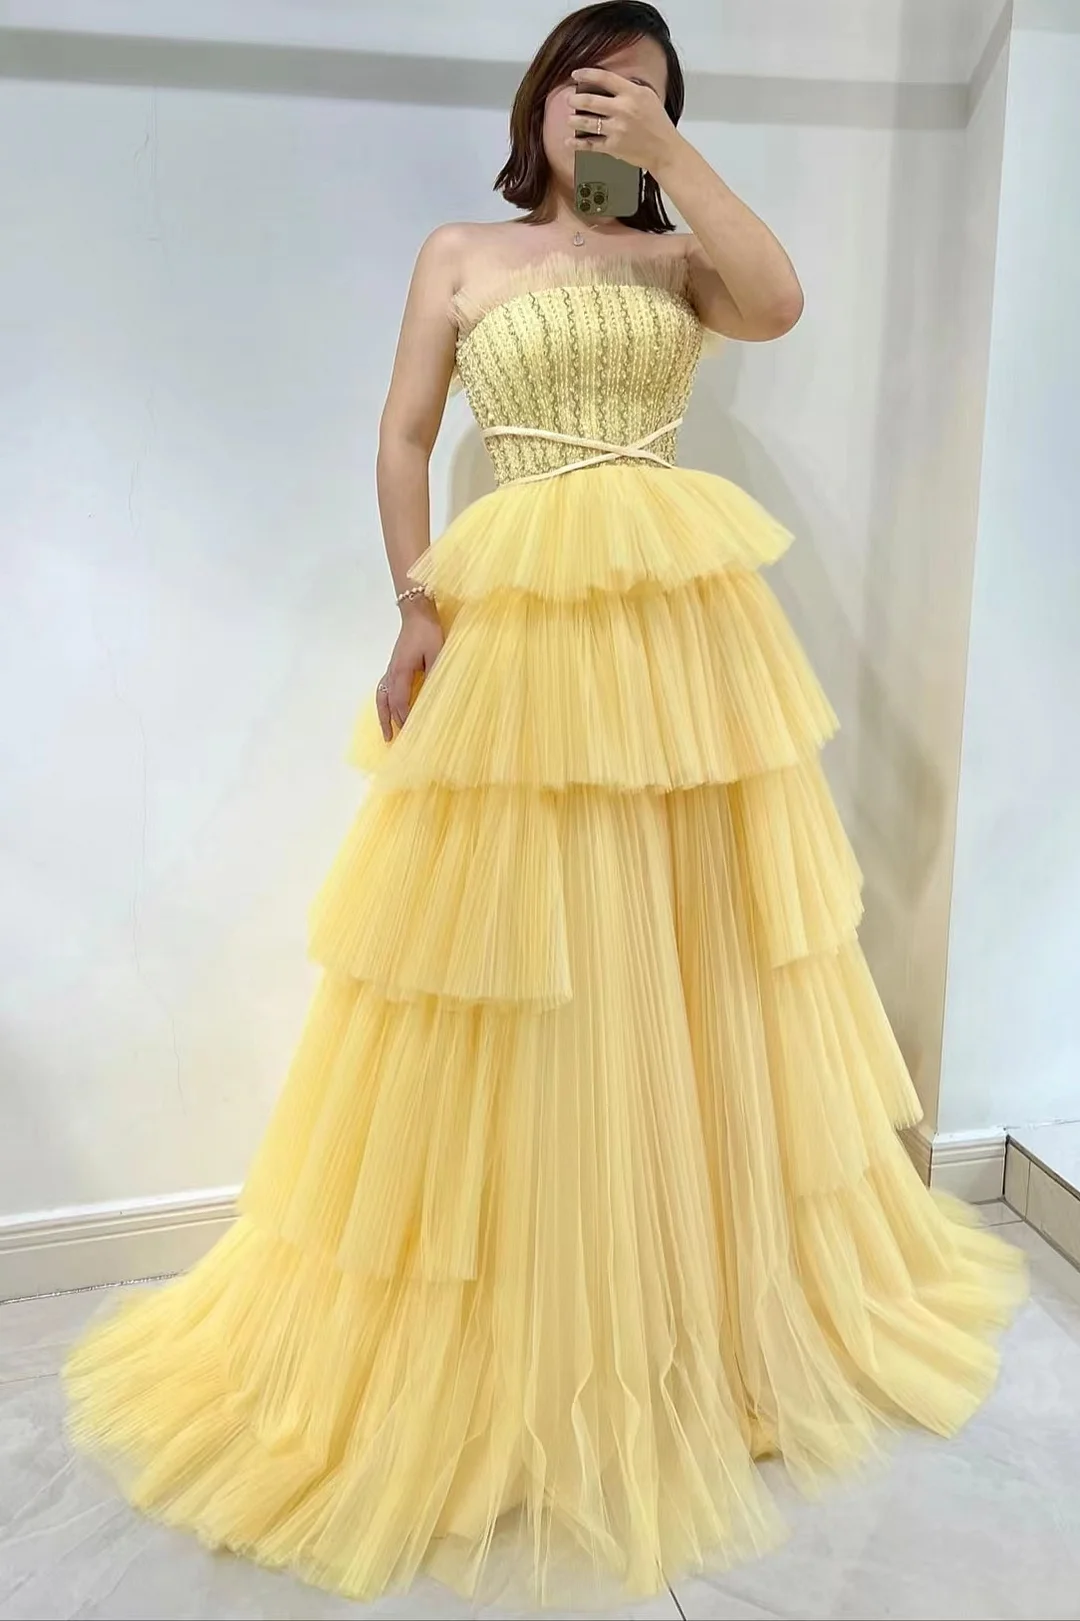 Daisda Daffodil Strapless Sleeveless Tulle Prom Dress With layered